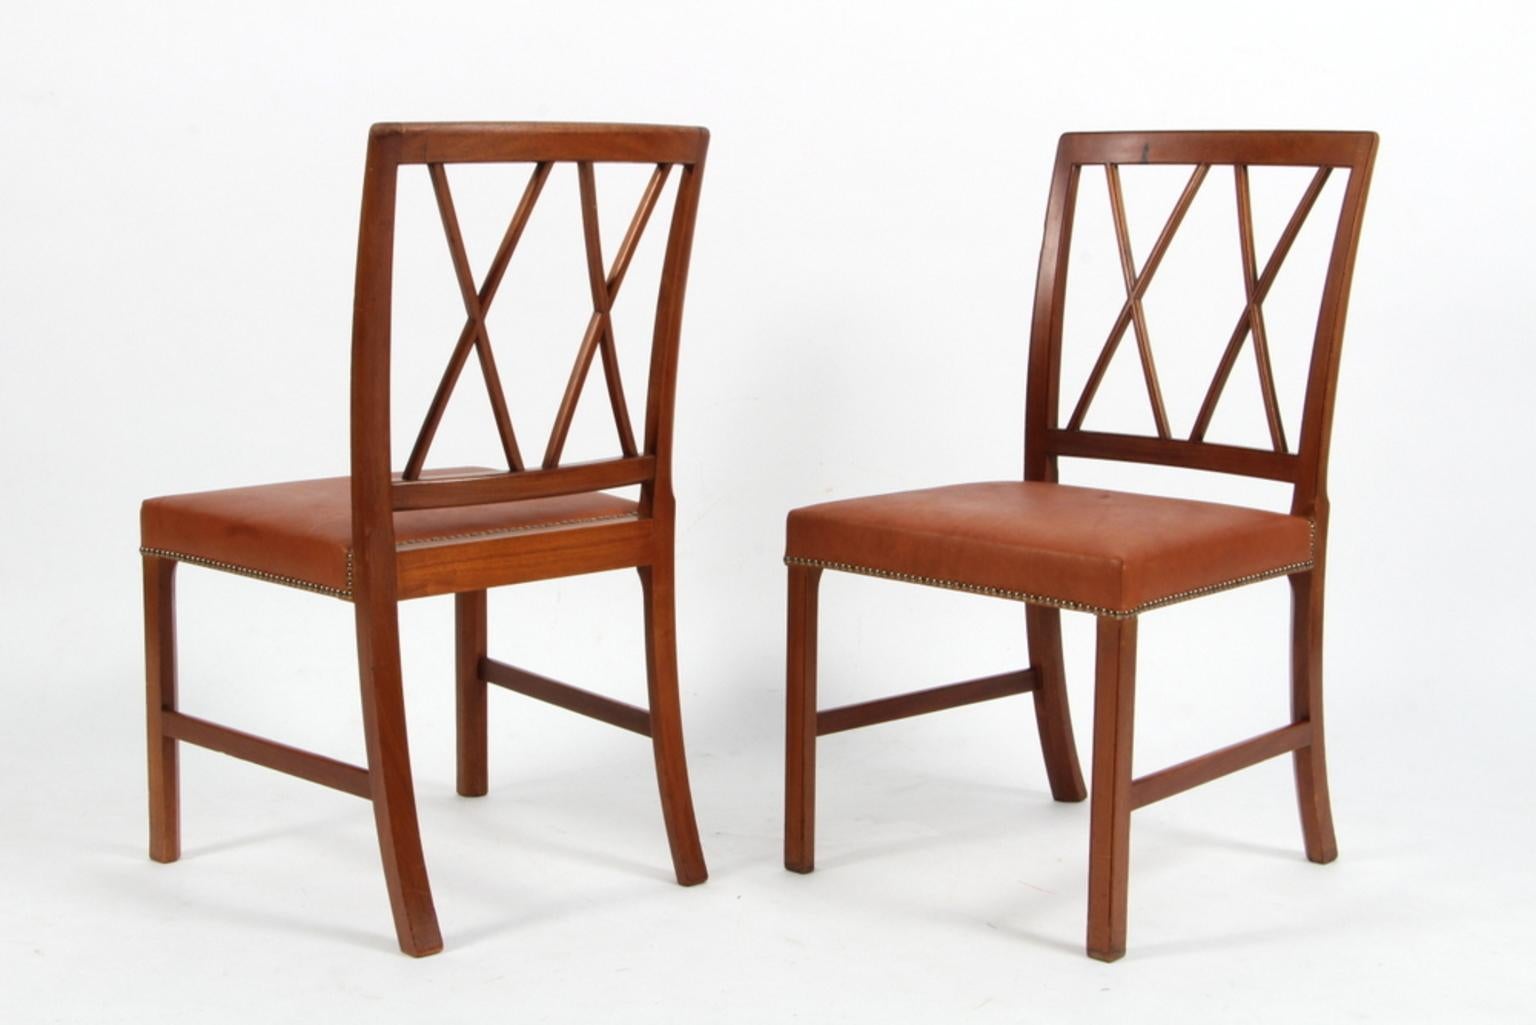 Danish Ole Wanscher Set of Four Dining Chairs in Mahogany and Cognac Aniline Leather